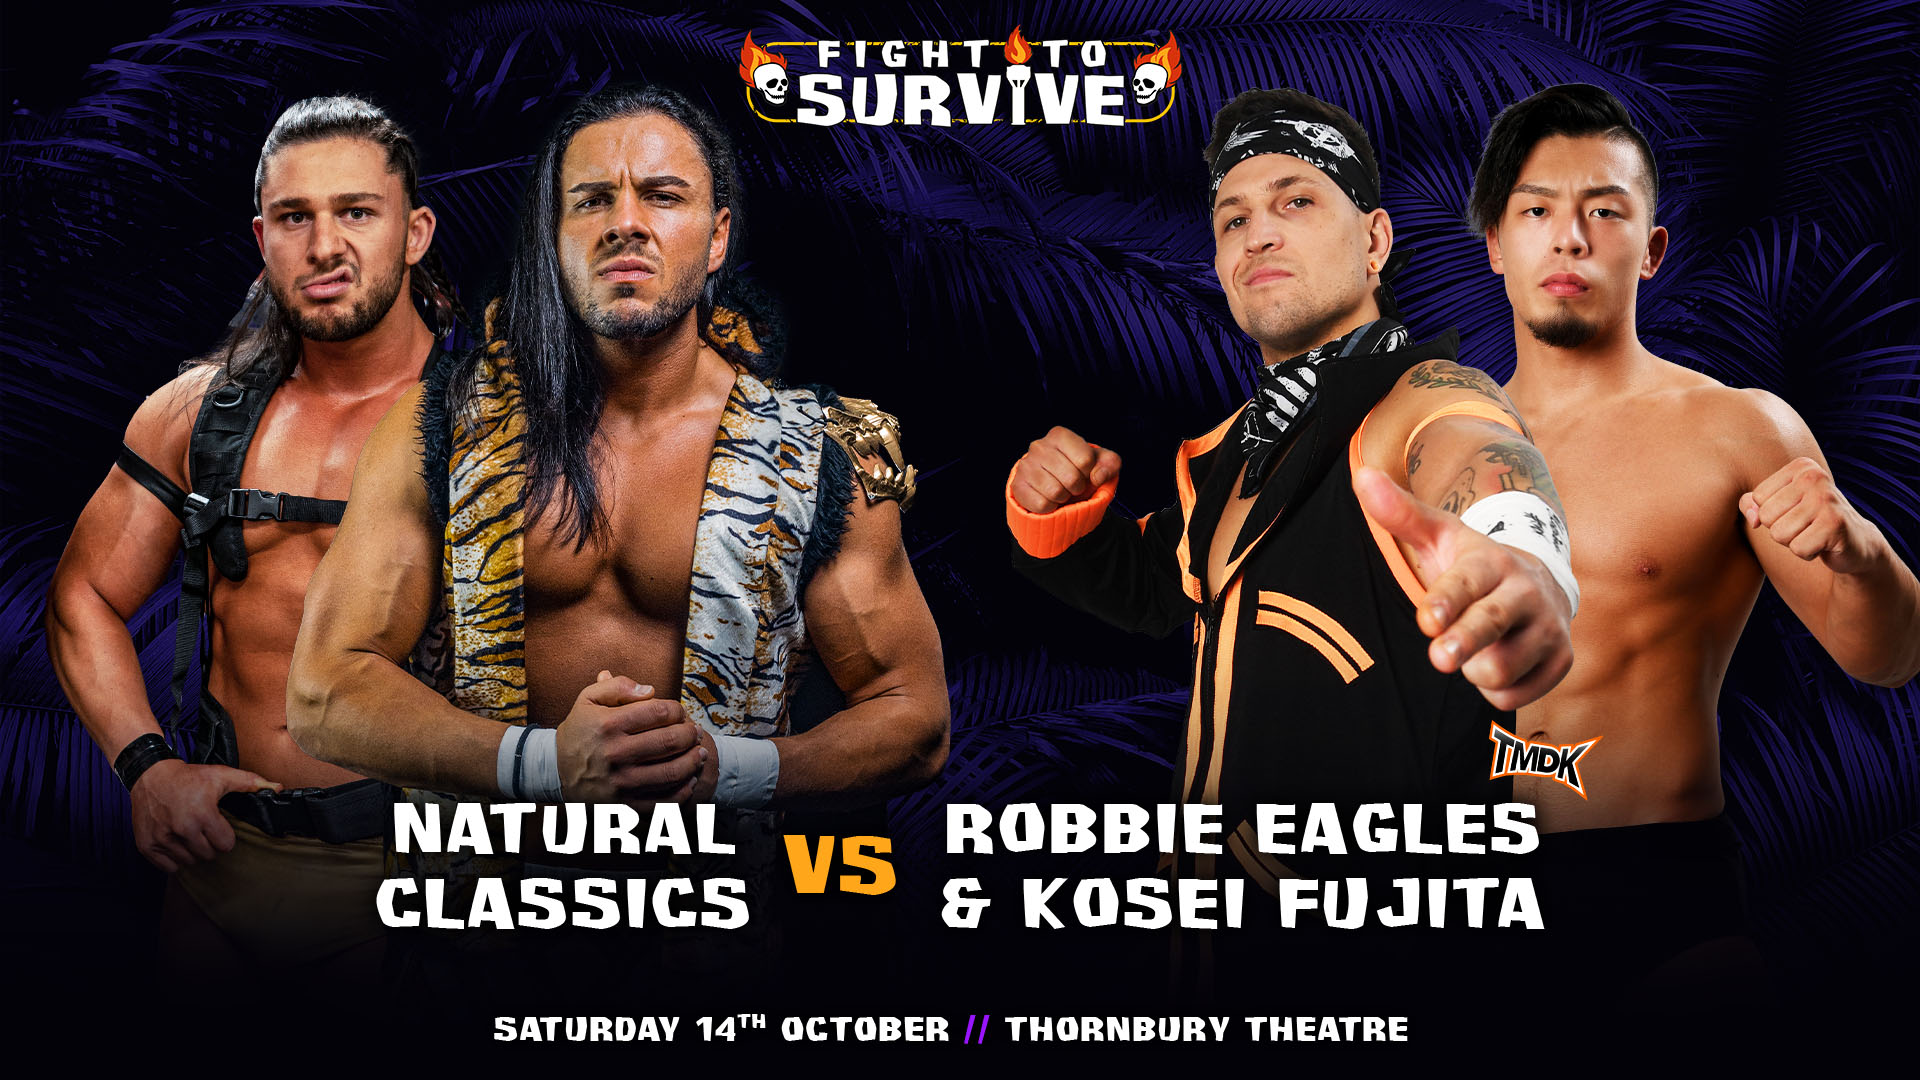 Fight to Survive – Tag Team Match